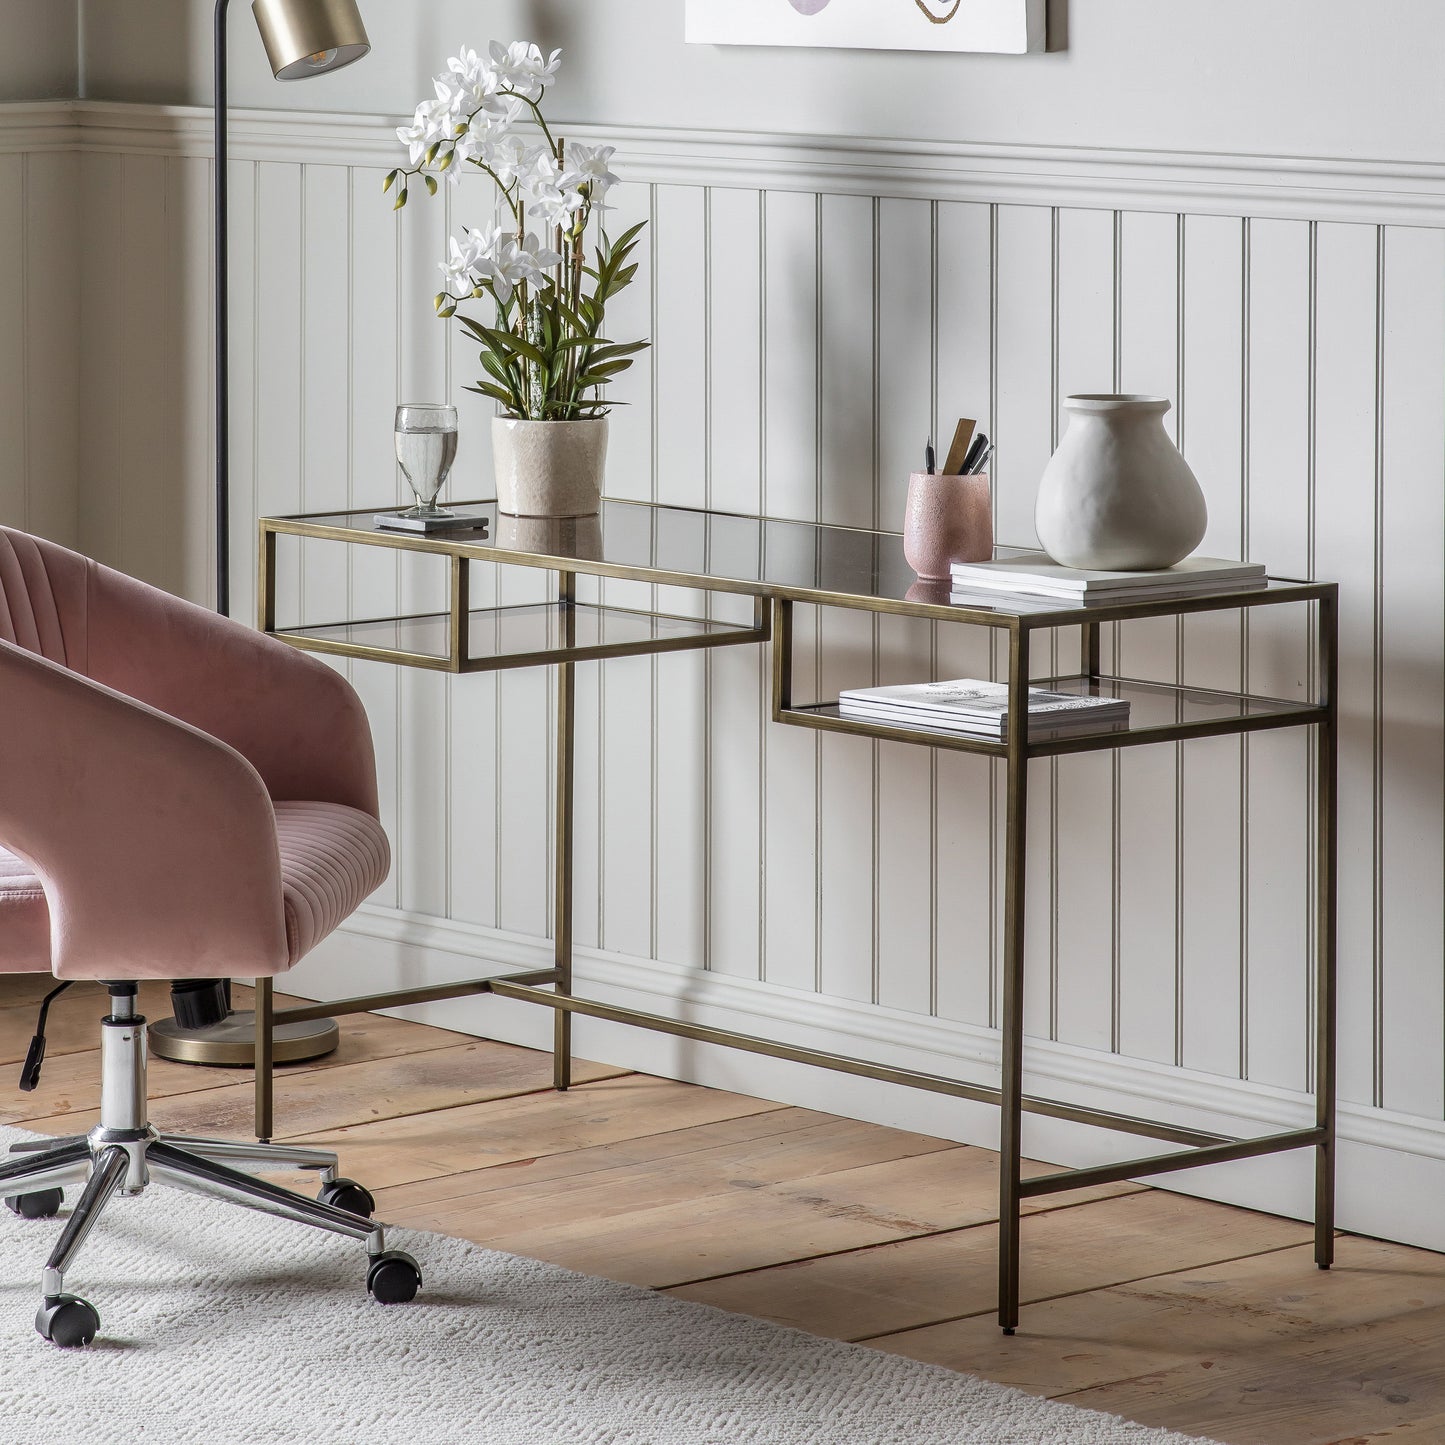 Interior decor: A pink chair and an Engleborne Desk Bronze 1300x500x760mm by Kikiathome.co.uk elegantly furnish a room with stylish home furniture.